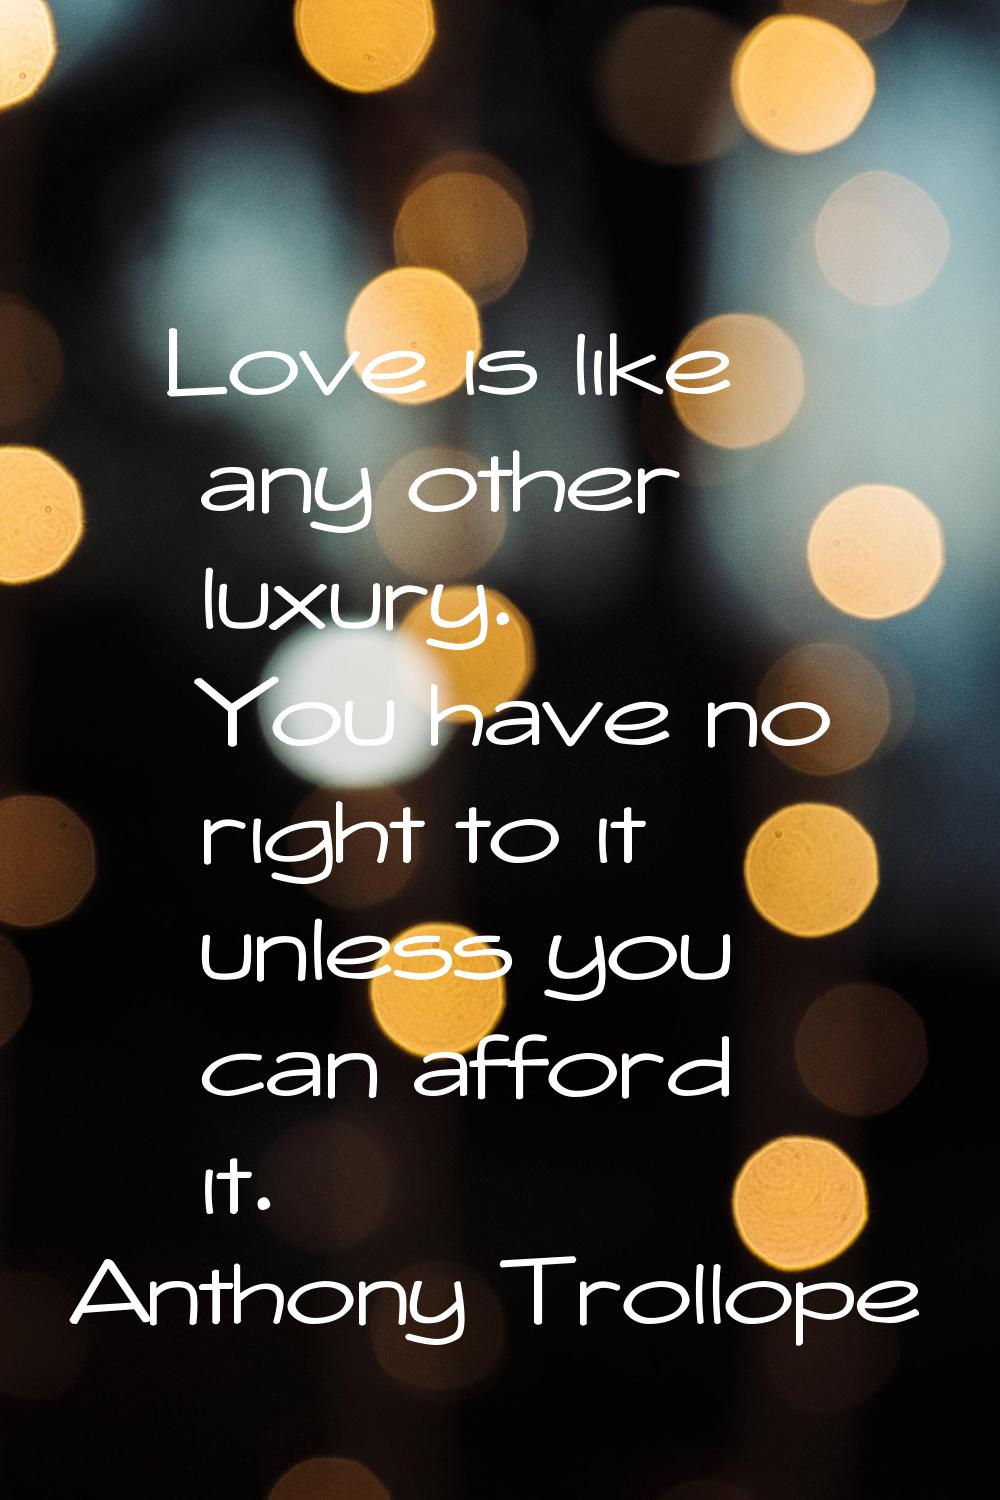 Love is like any other luxury. You have no right to it unless you can afford it.